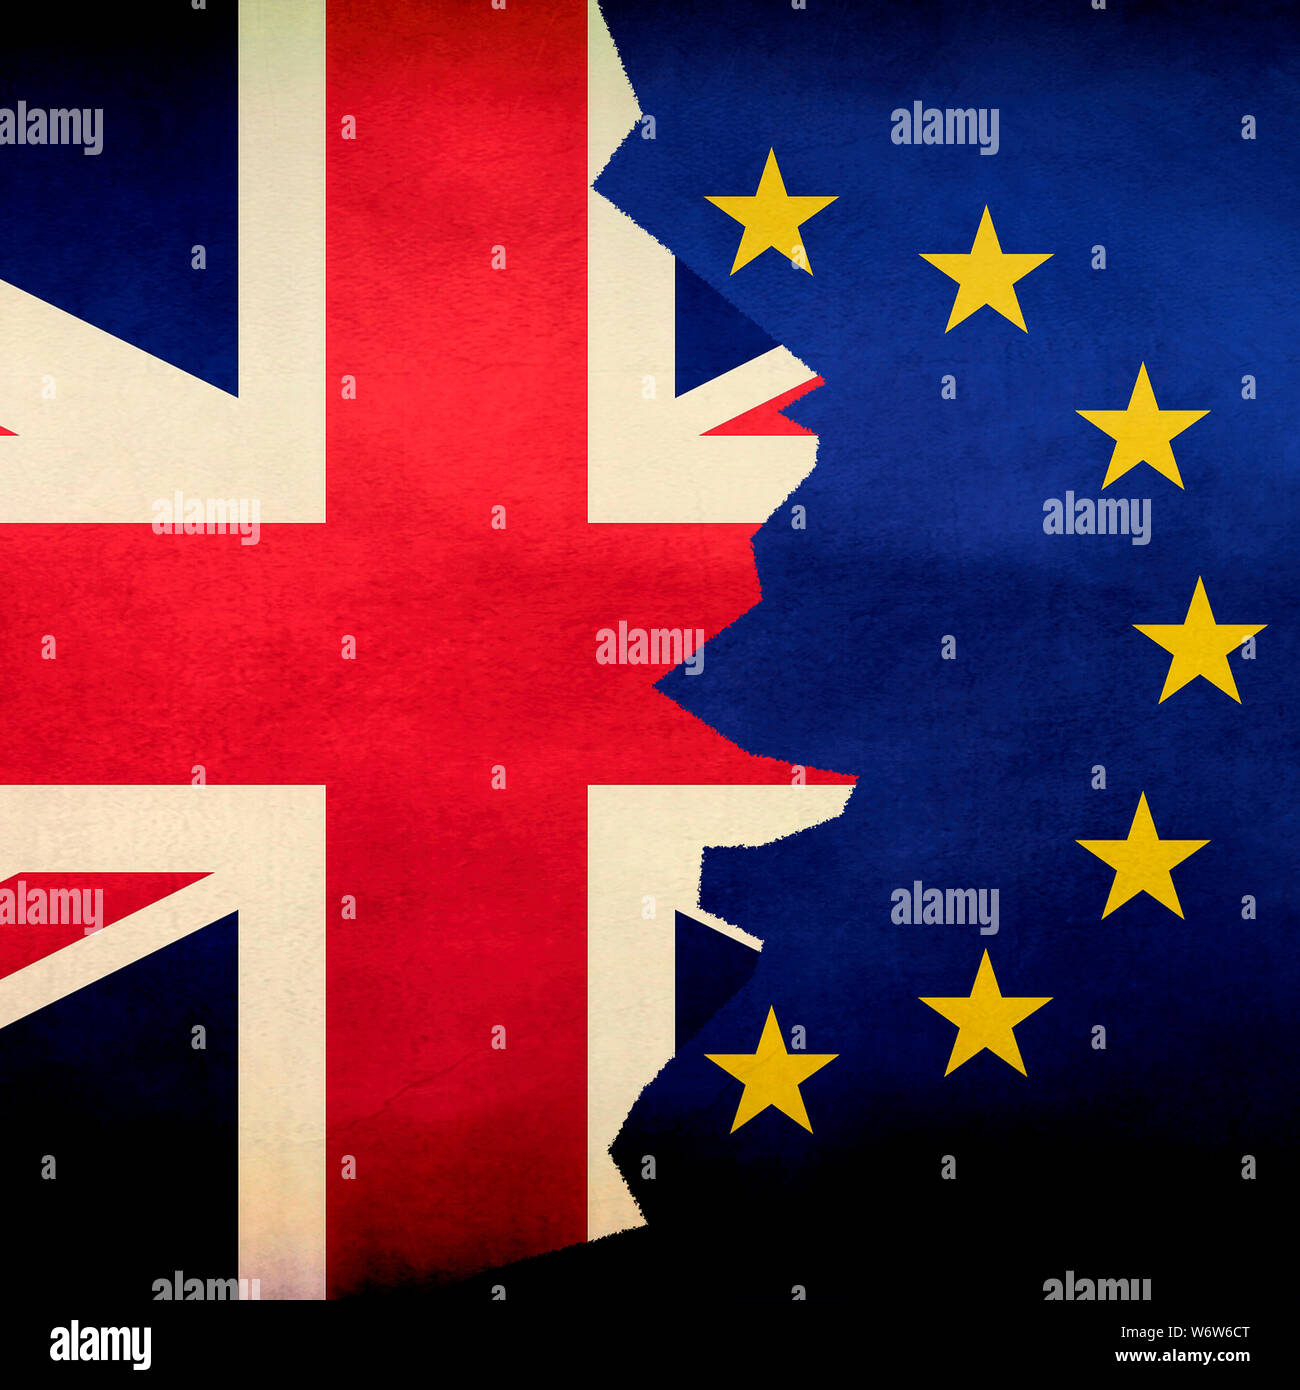 Flags to depict the breakup of the UK and EU as a result of the BREXIT. Stock Photo